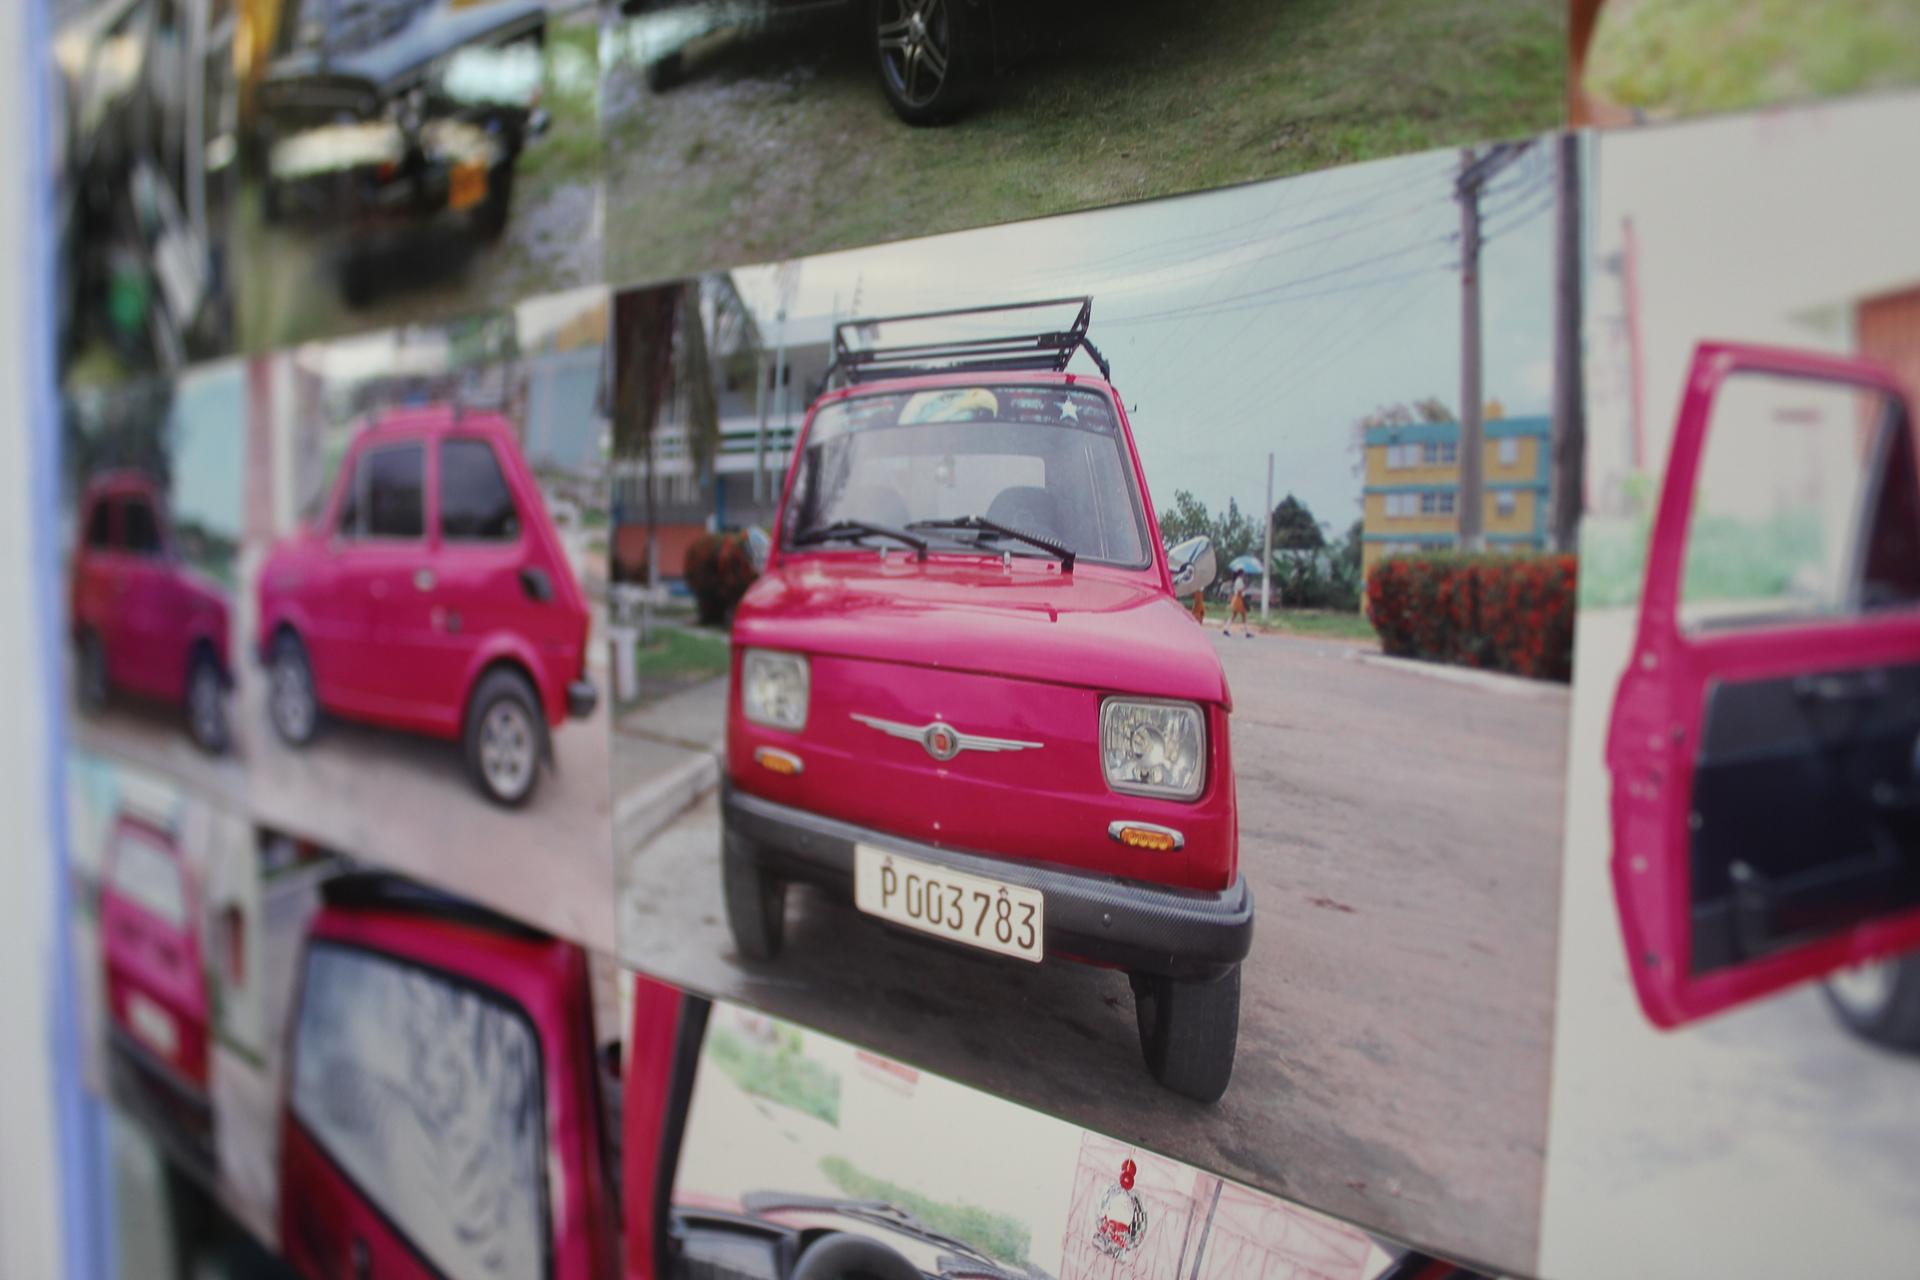 The walls of Zakharov Auto Parts in Hialeah, just outside Miami, are filled with photos of vintage Russian cars in Cuba fixed with parts bought at the store.